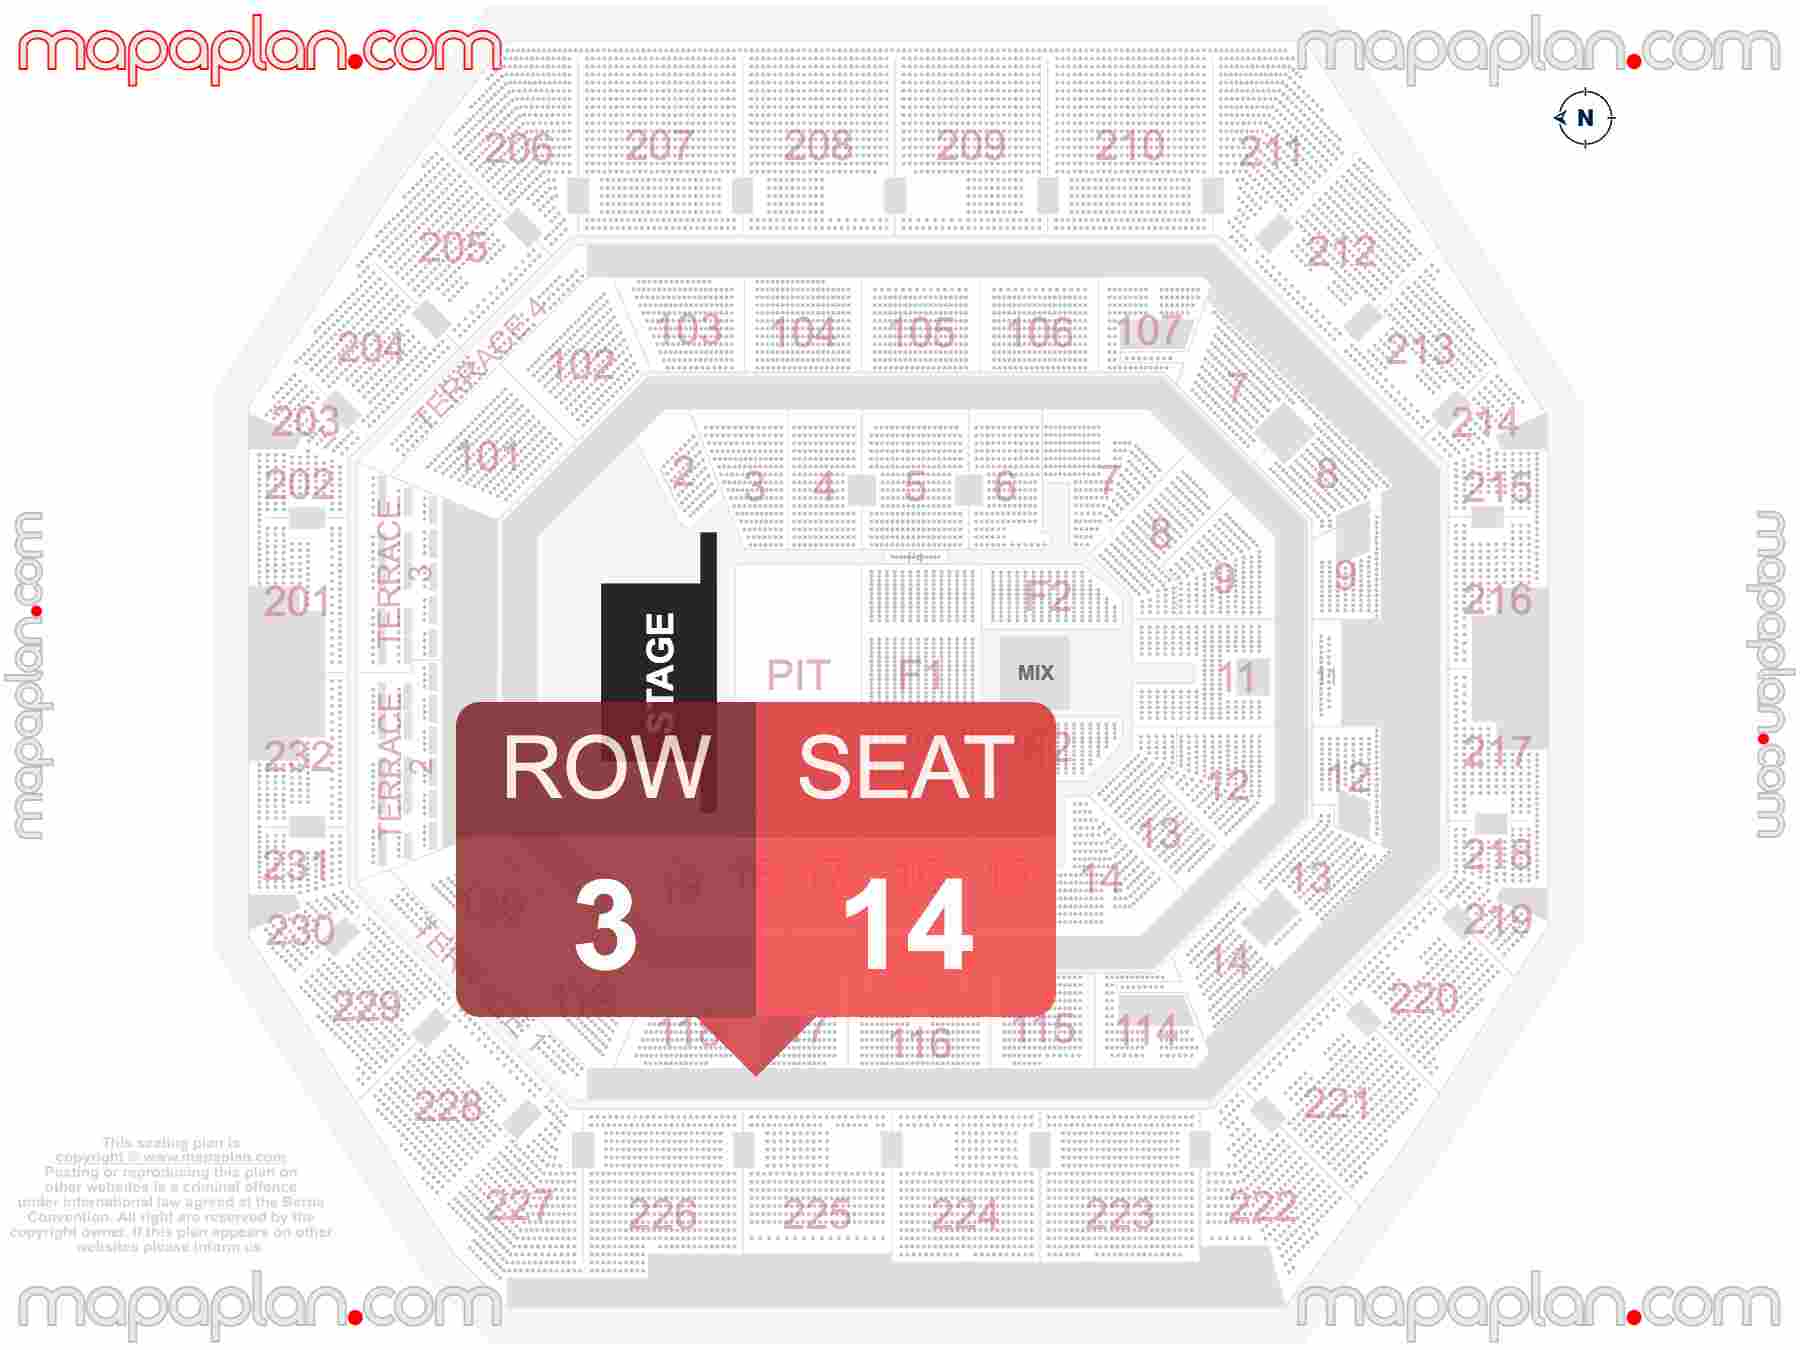 Indianapolis Gainbridge Fieldhouse seating chart Concert with PIT floor standing detailed seating chart - 3d virtual seat numbers and row layout